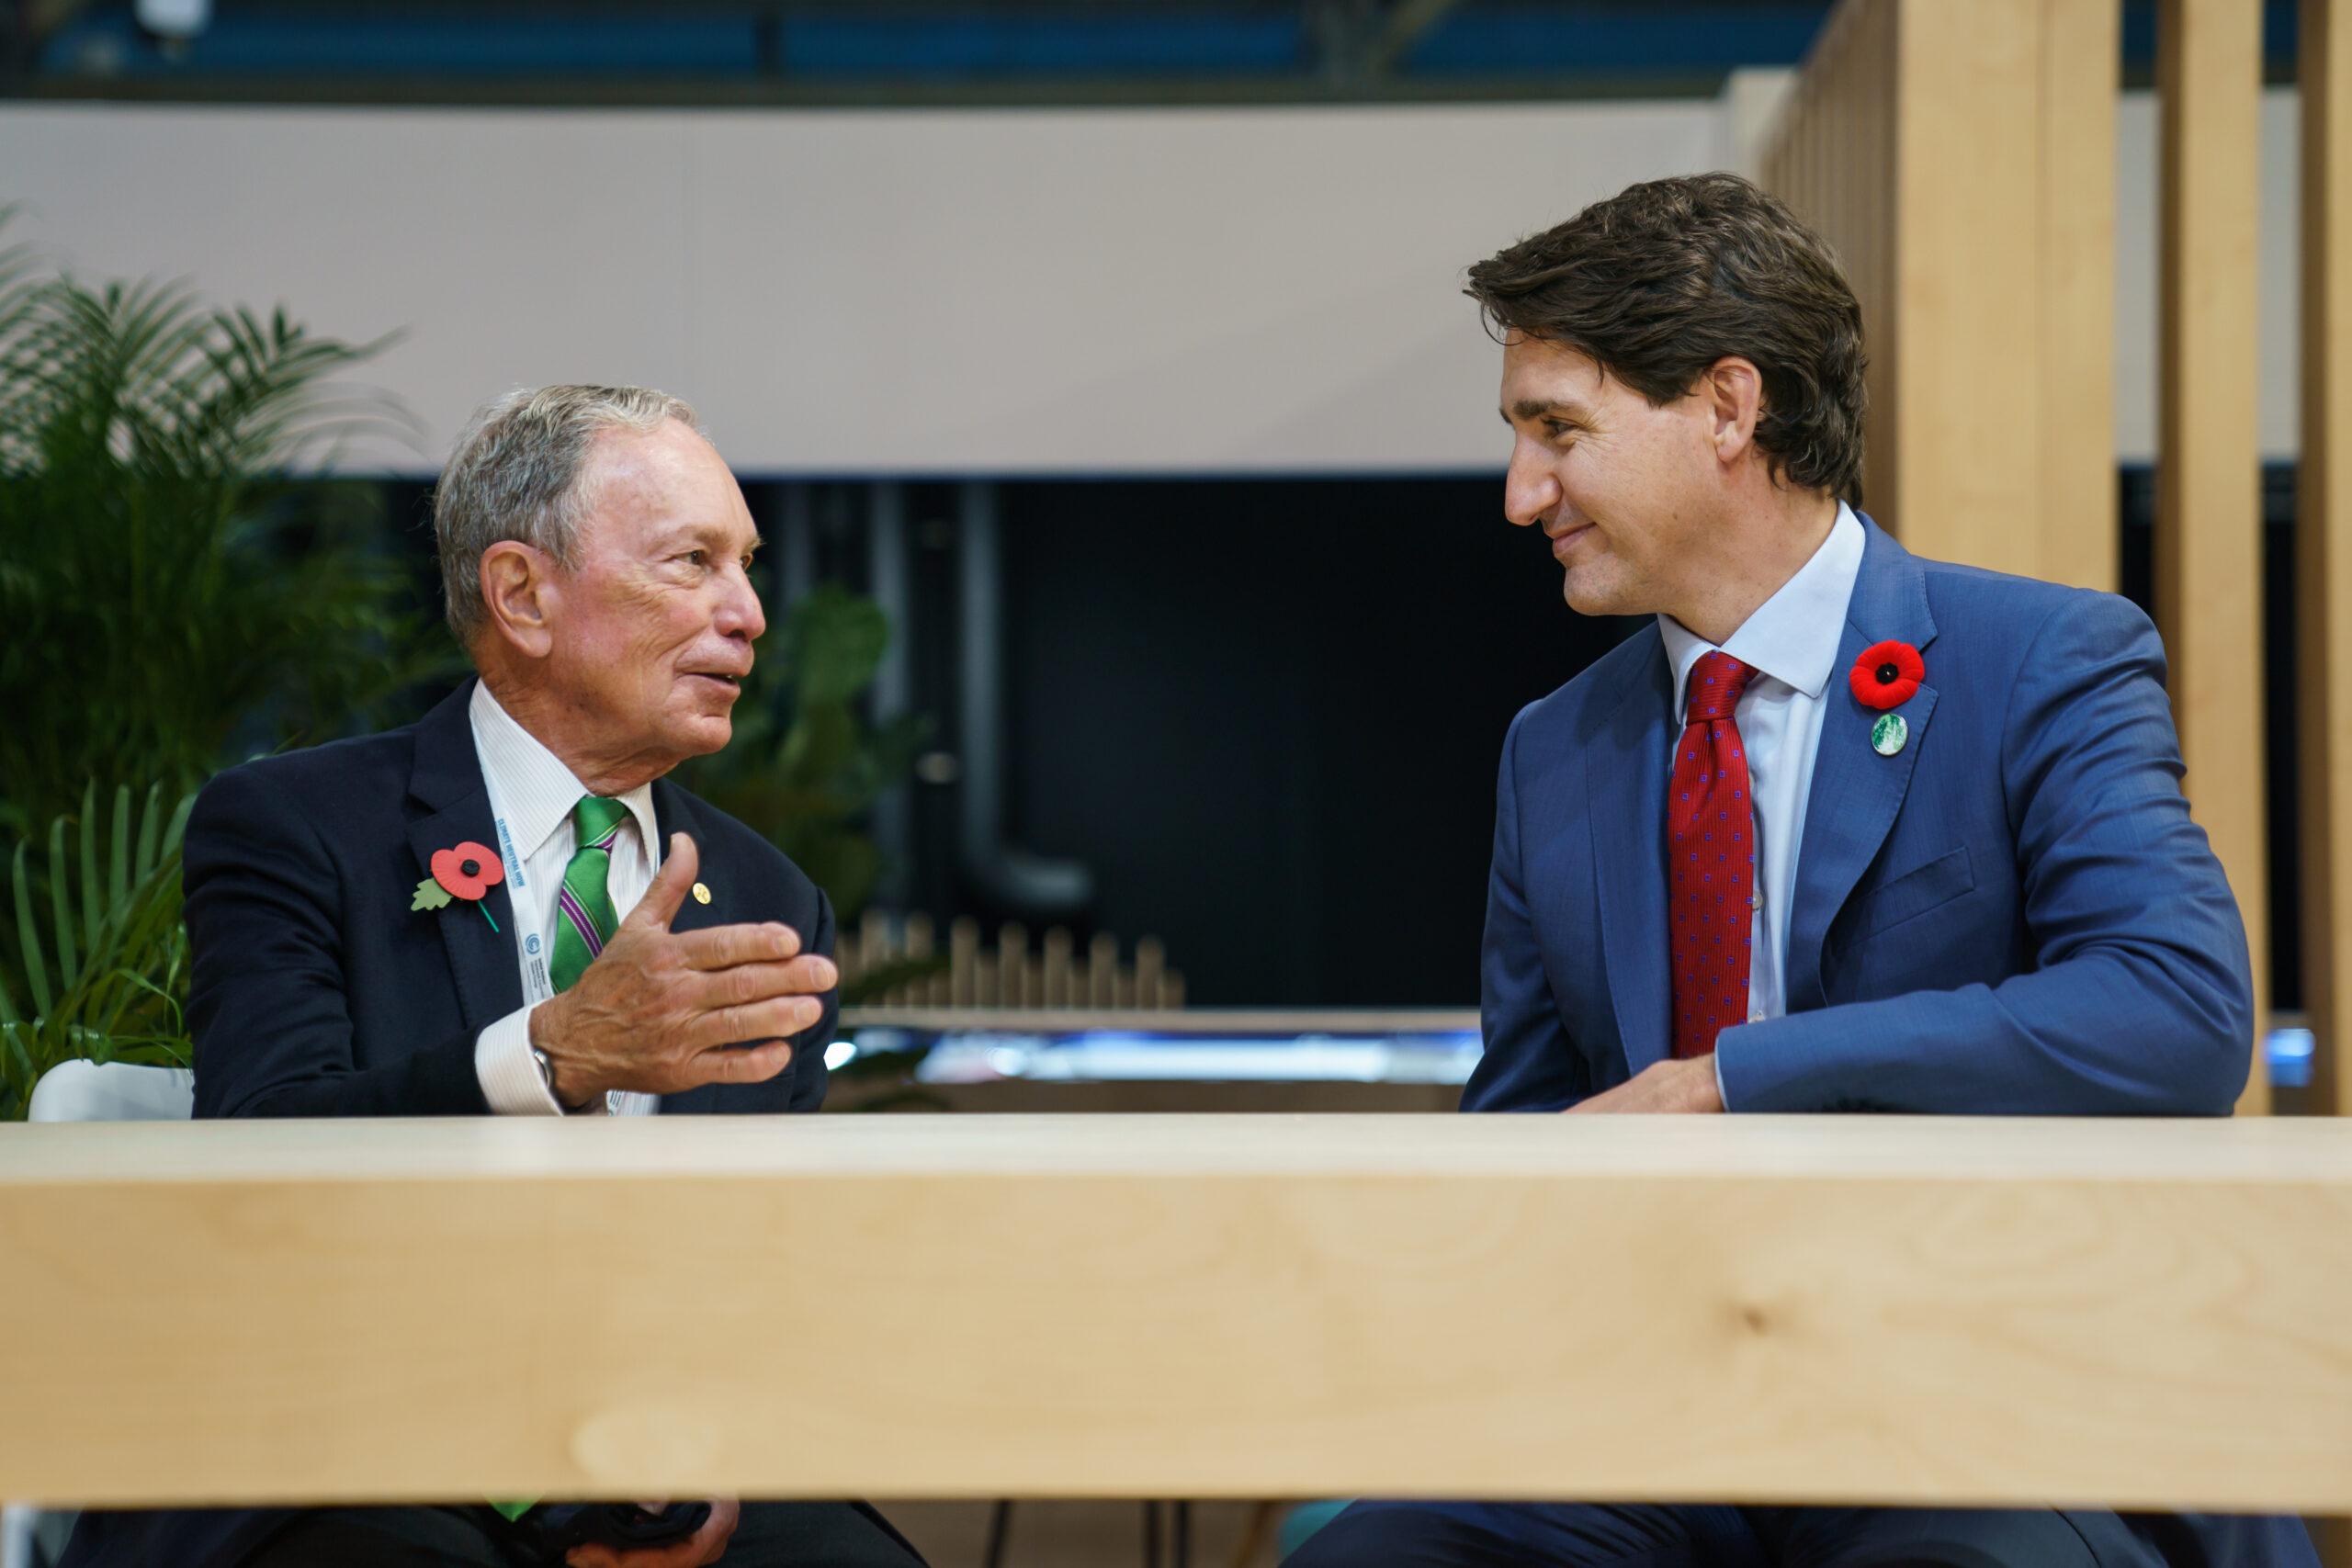 Prime Minister Justin Trudeau speaks with Michael Bloomberg at COP26 in Glasgow on Nov. 1, 2021.